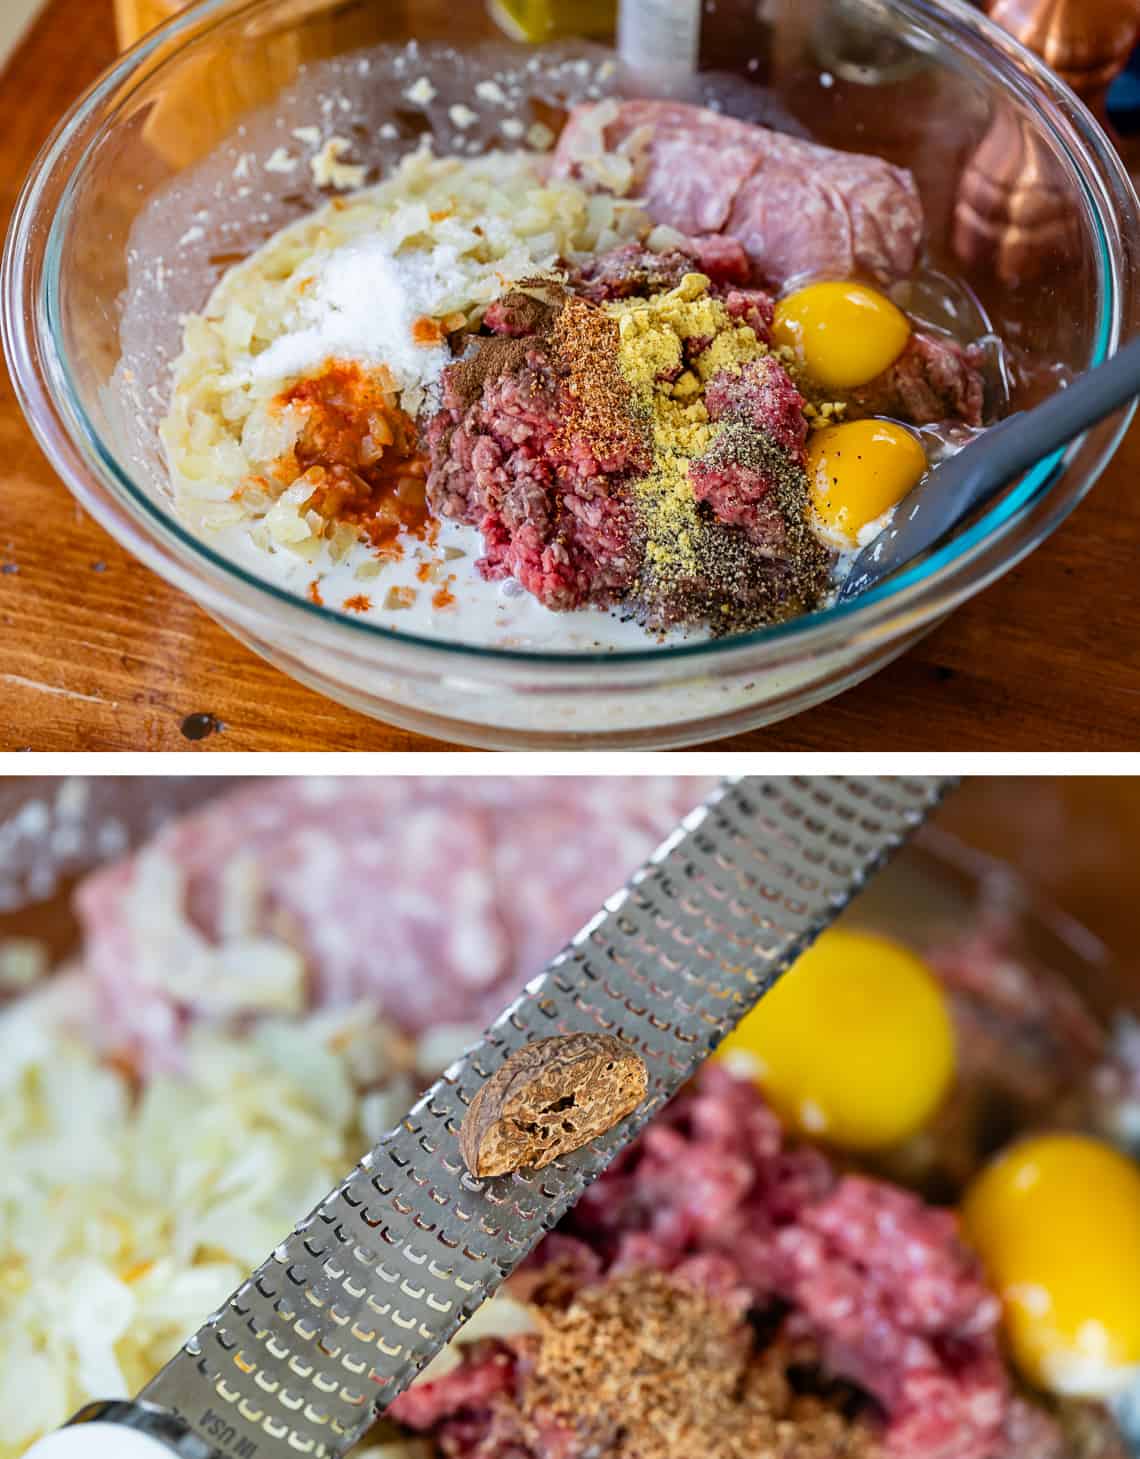 top meatball ingredients in a glass bowl, bottom grating fresh nutmeg with a microplane.